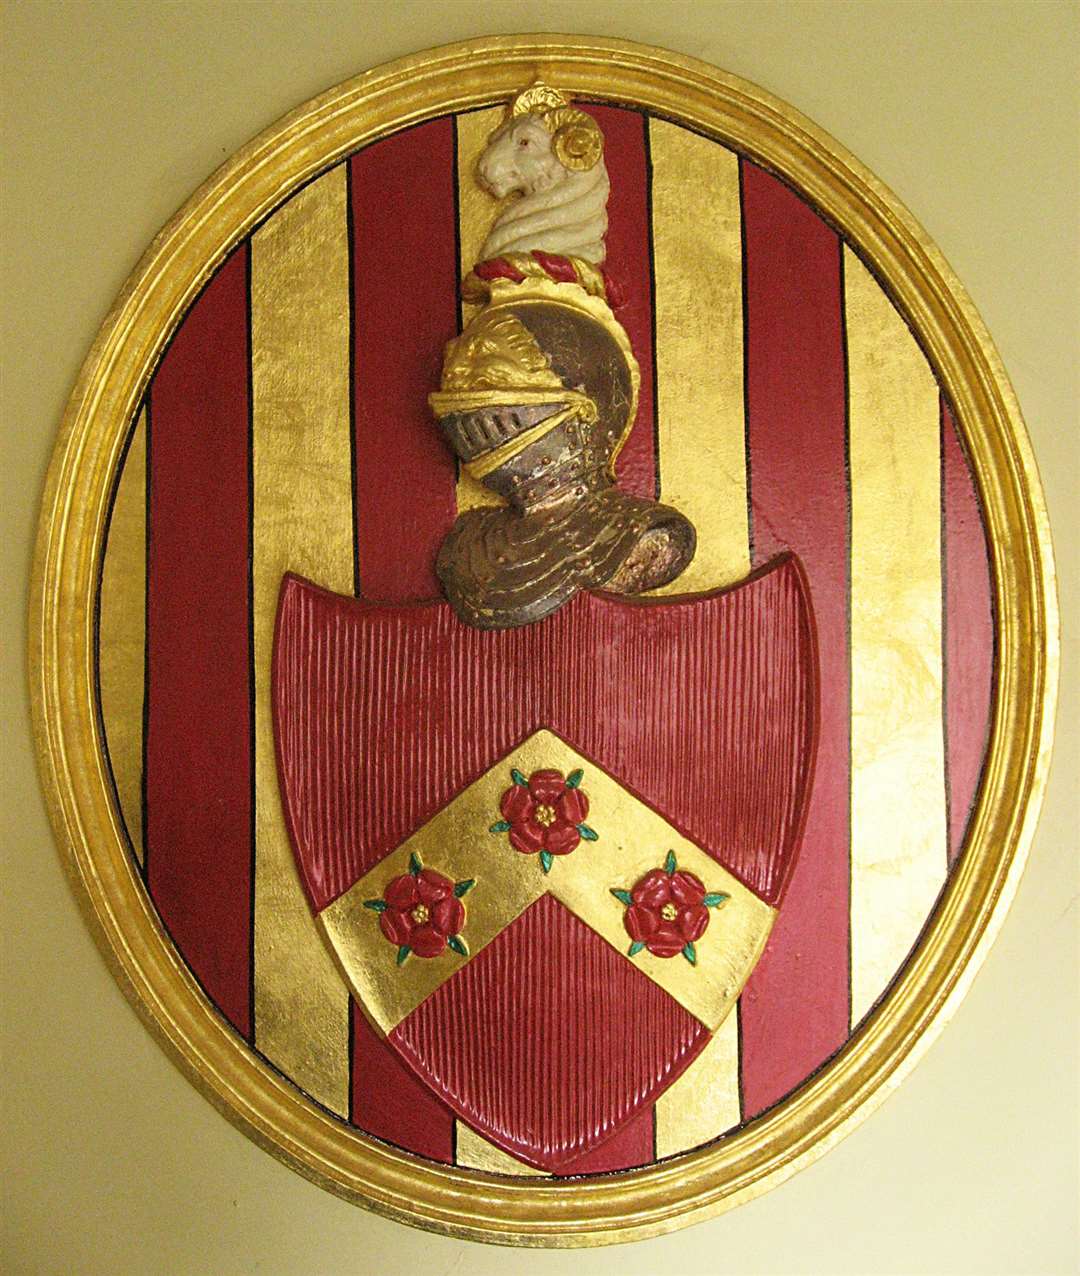 The coat of arms for Sir Robert Knowlles, one of the wealthy knights and Kent landowners who set up the original Wardens and Assistants of Rochester Bridge under royal assent in 1399. Picture: Rochester Bridge Trust